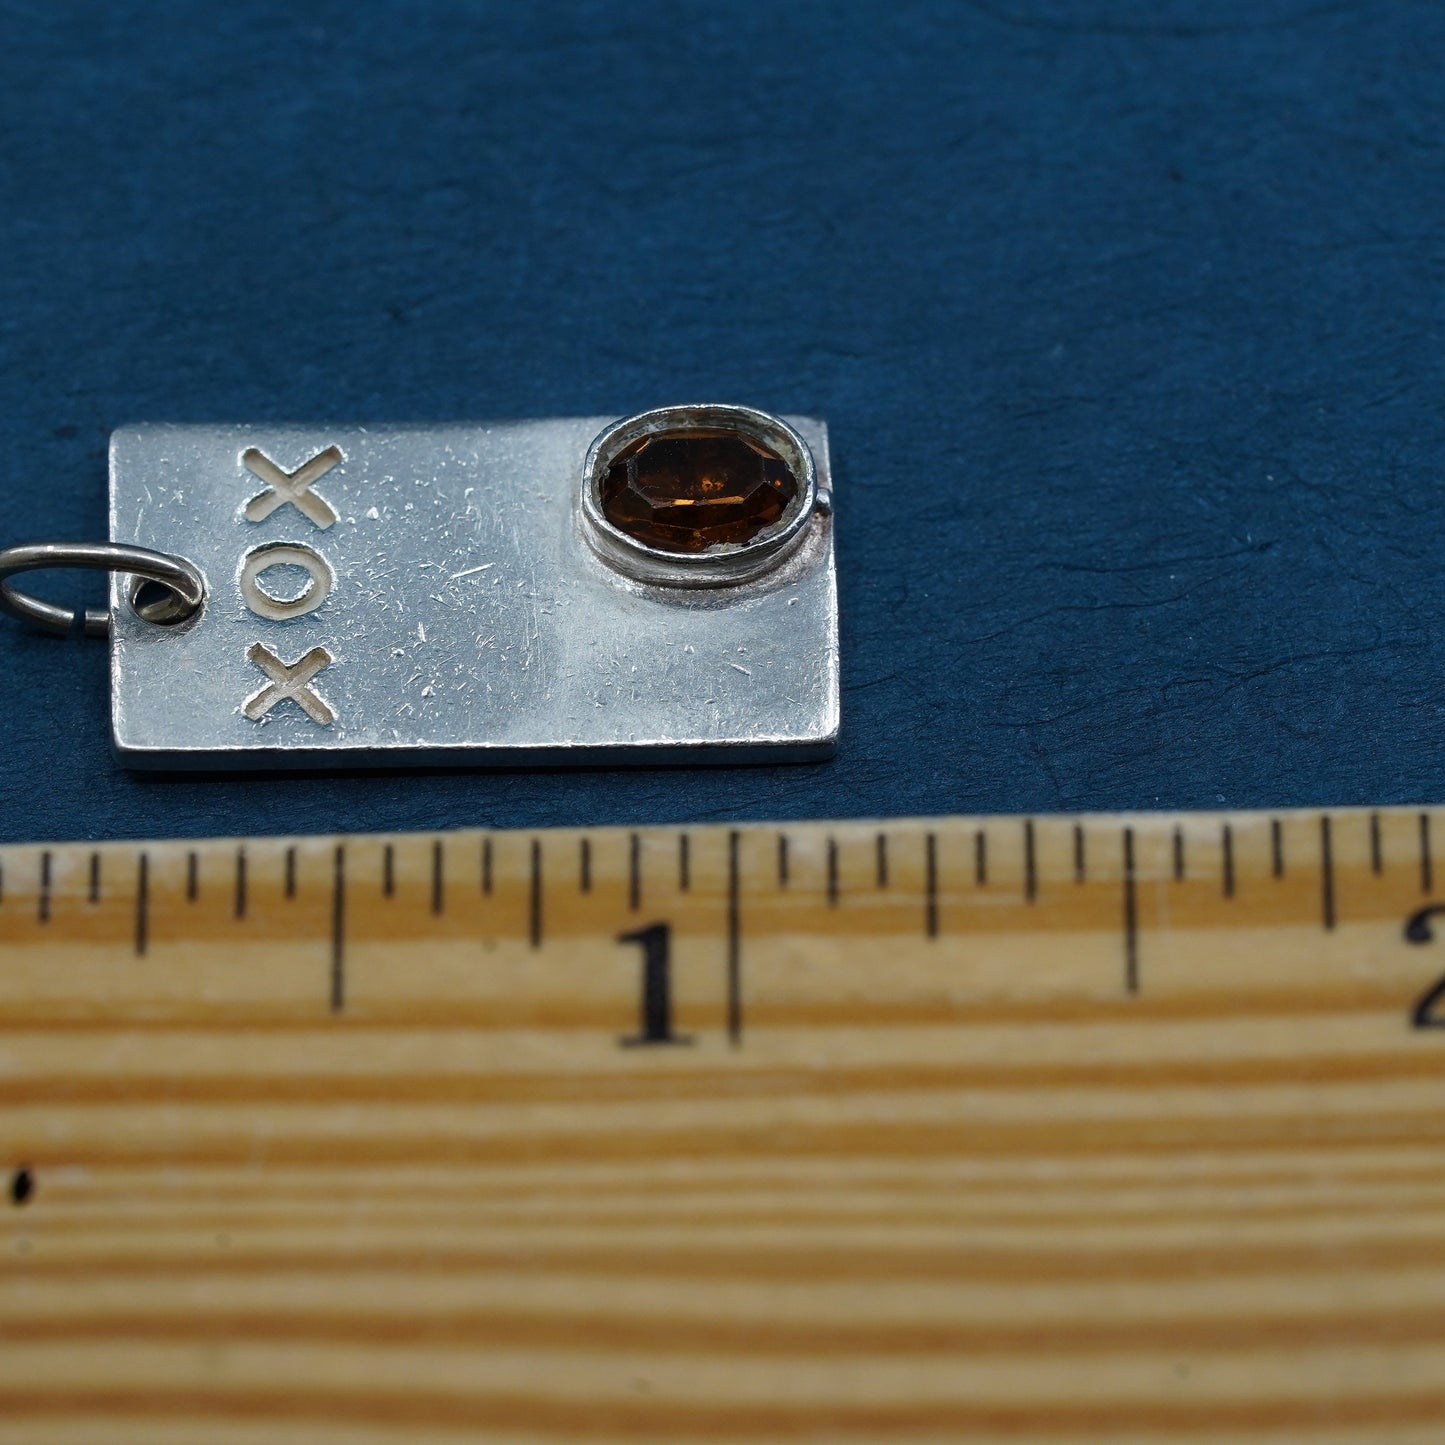 Sterling silver pendant, rectangular 925 tag charm embossed “XOX” with citrine